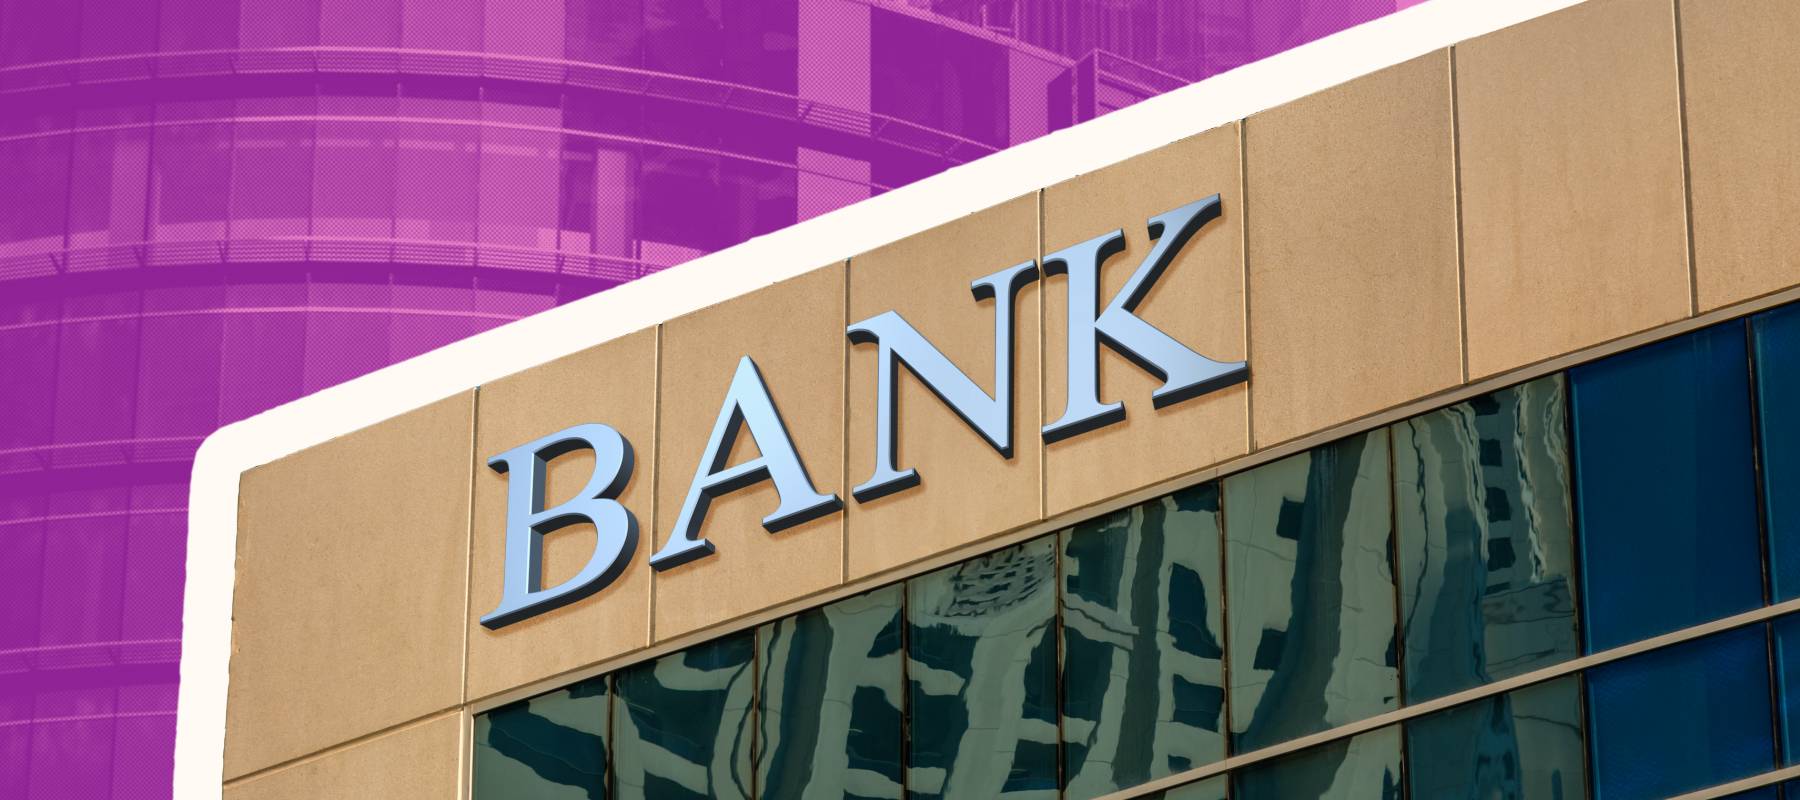 Bank sign on glass wall of business center